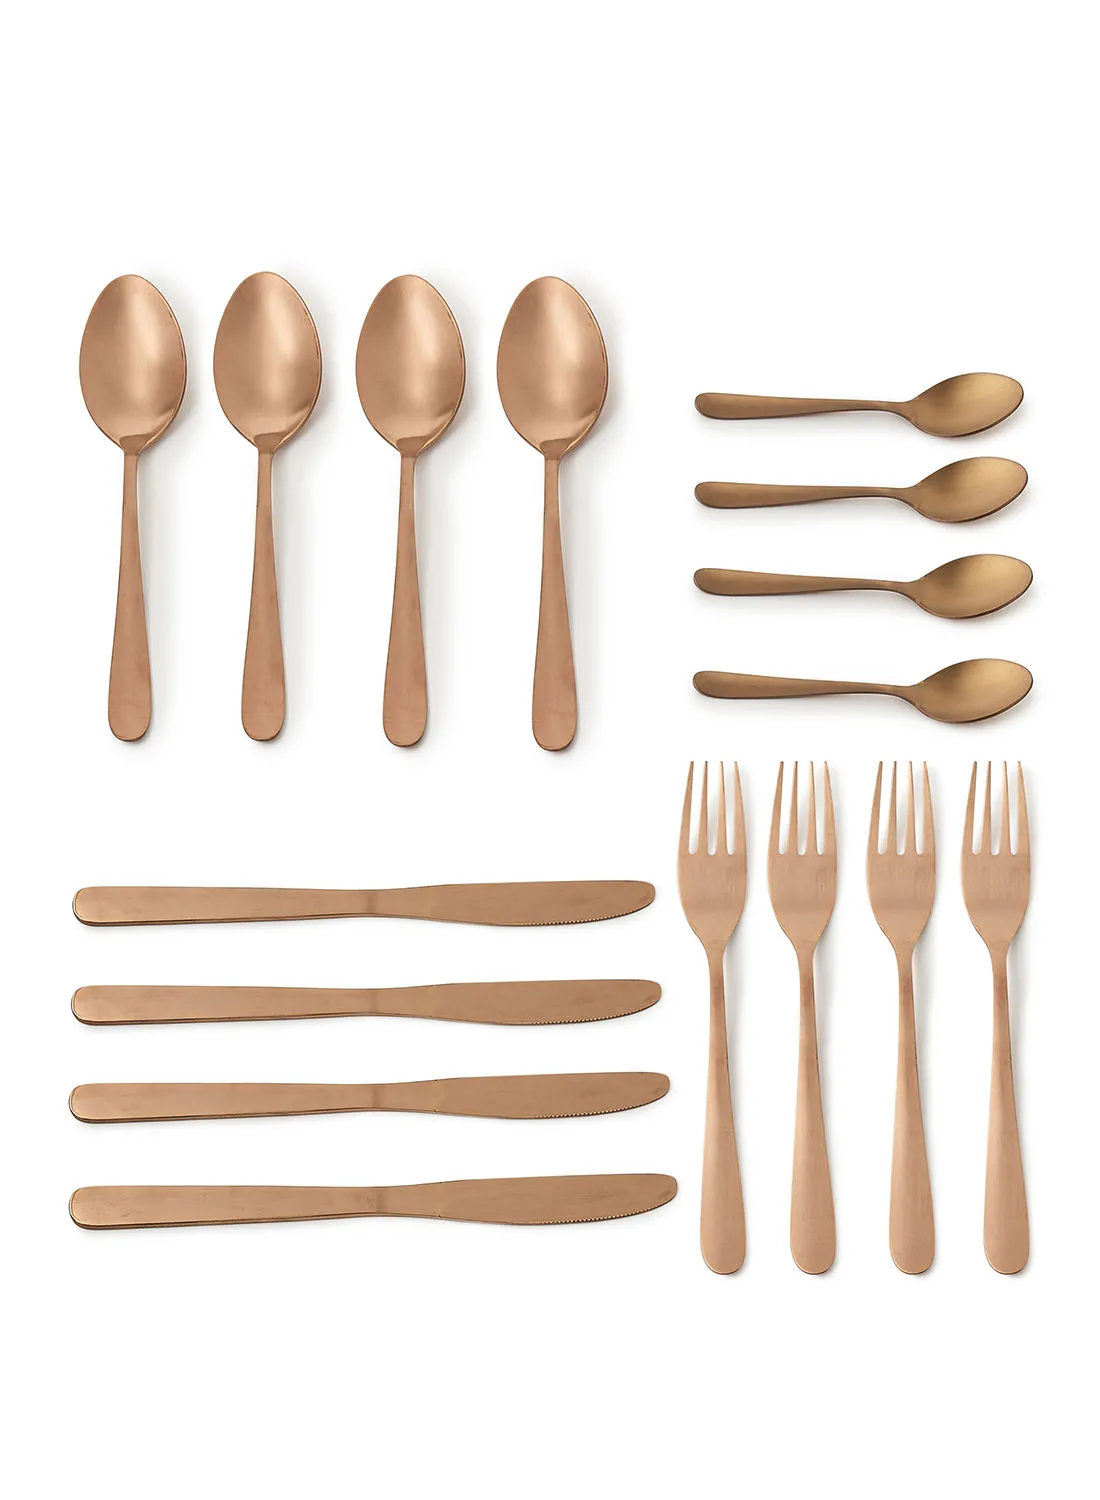 Amal 16 Piece Cutlery Set - Made Of Stainless Steel - Silverware Flatware - Spoons And Forks Set, Spoon Set - Table Spoons, Tea Spoons, Forks, Knives - Serves 4 - Design Copper Daisy